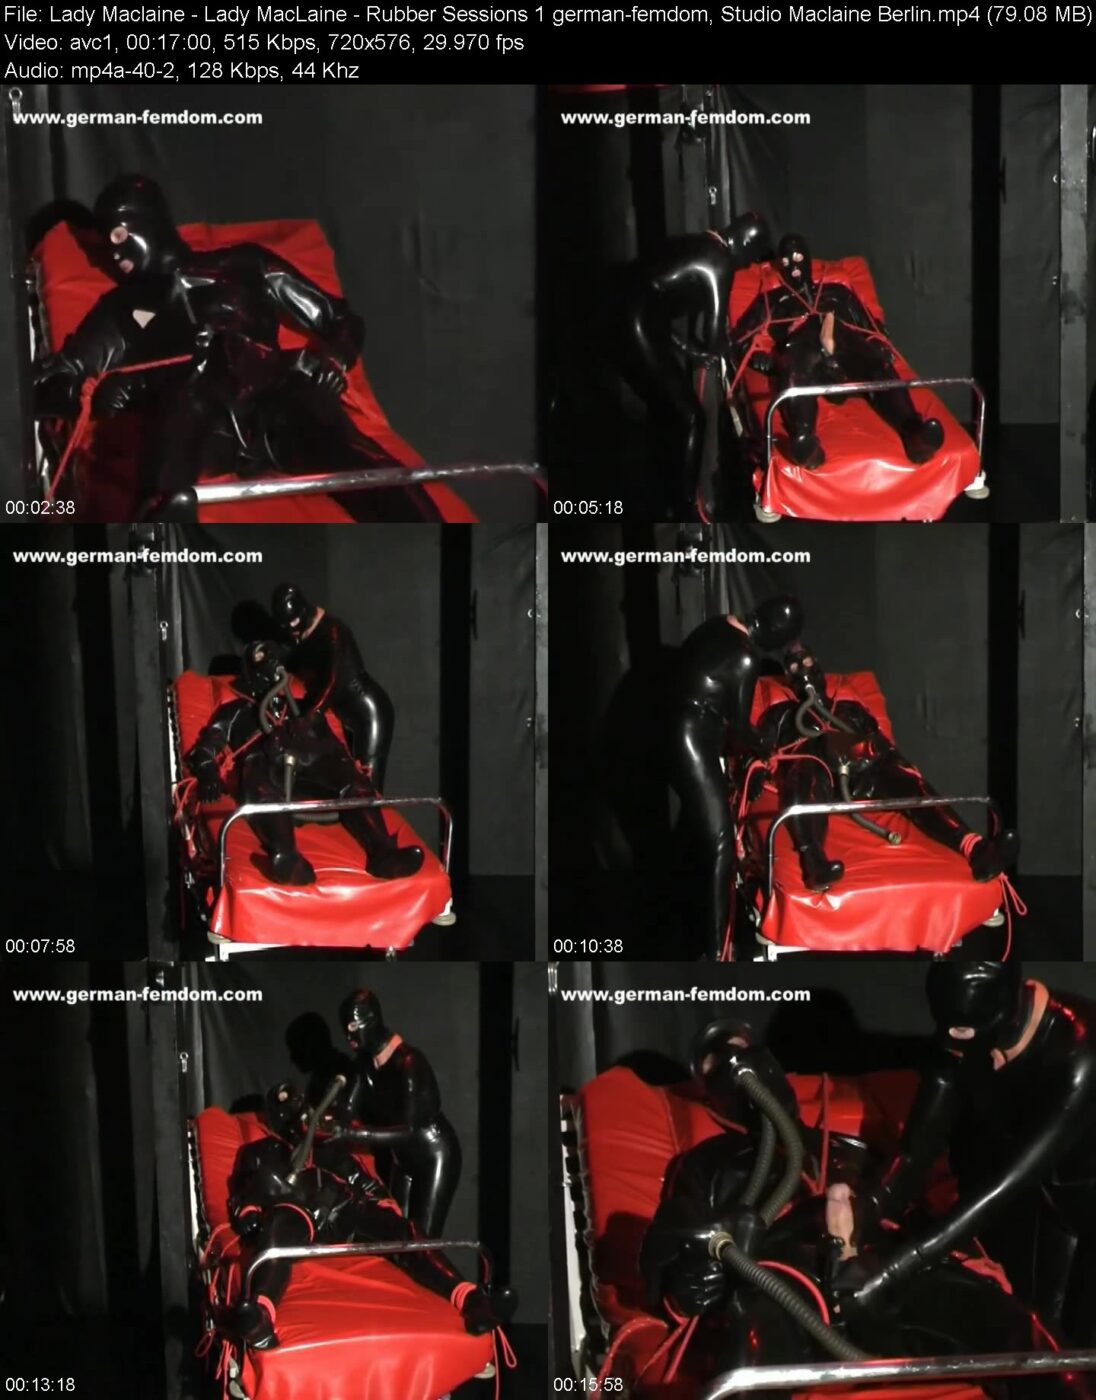 Actress: Lady Maclaine. Title and Studio: Lady MacLaine – Rubber Sessions 1 german-femdom, Studio Maclaine Berlin